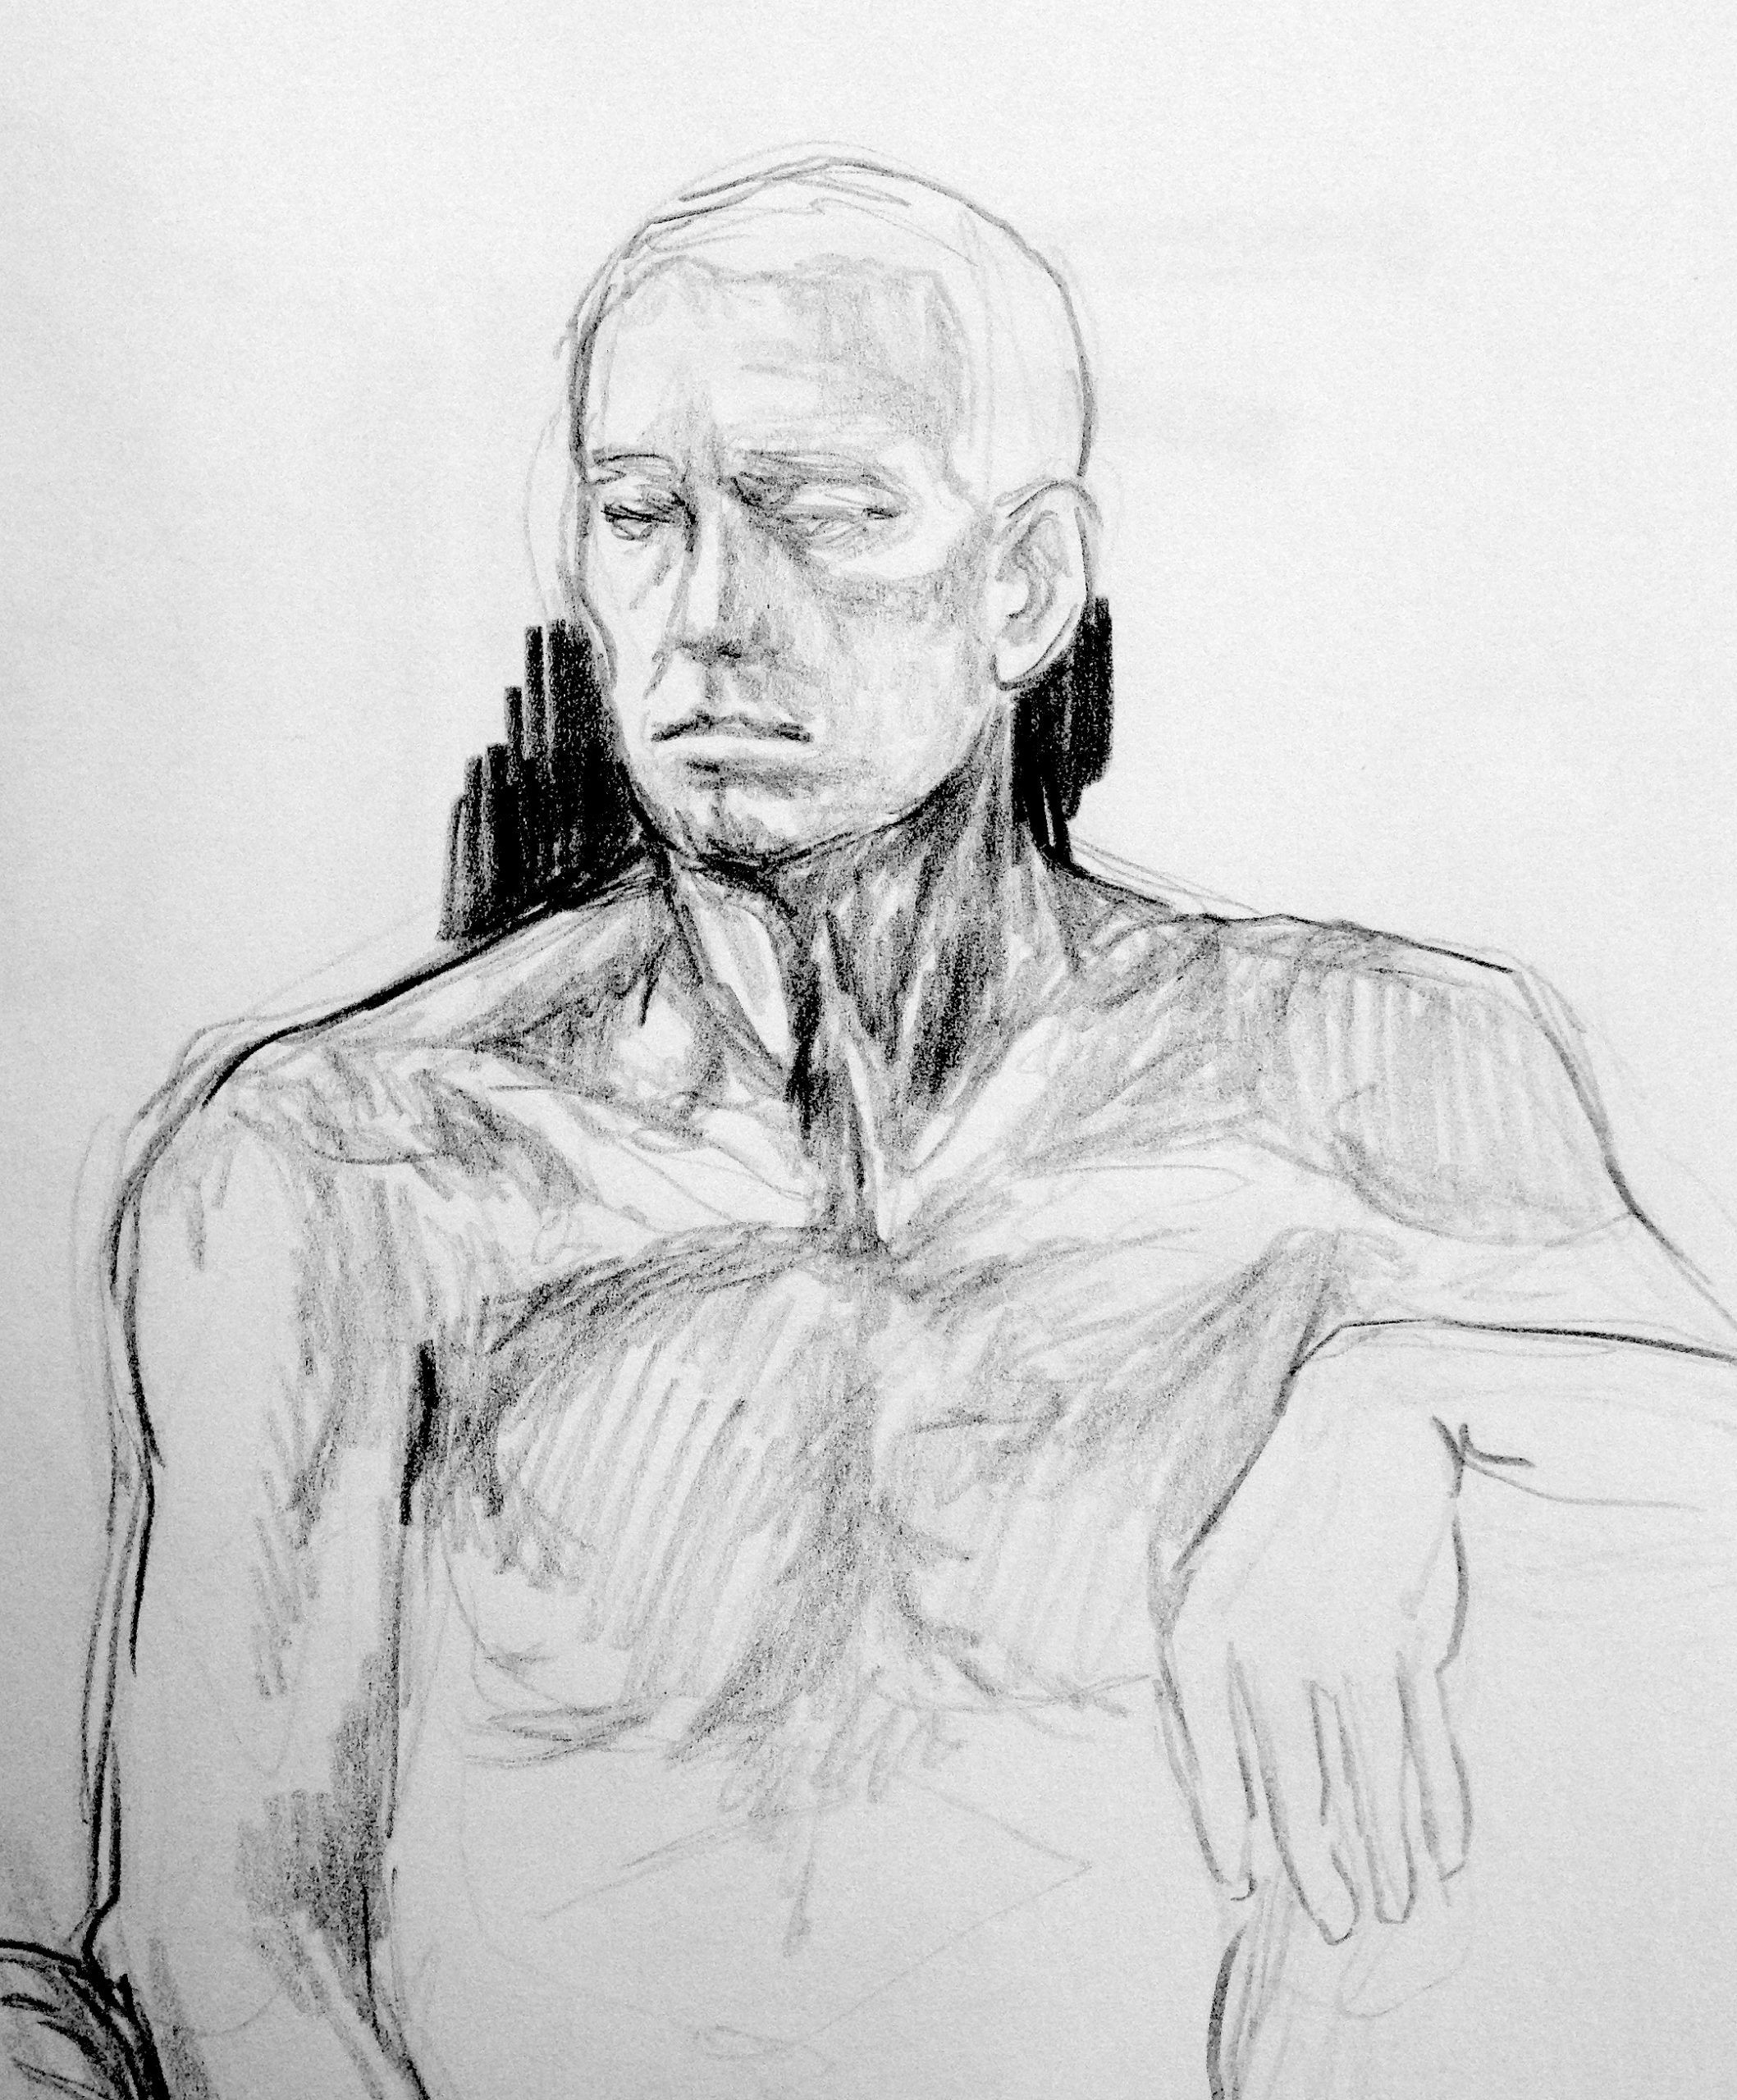 drawing of a man from wait up sitting and looking toward the left